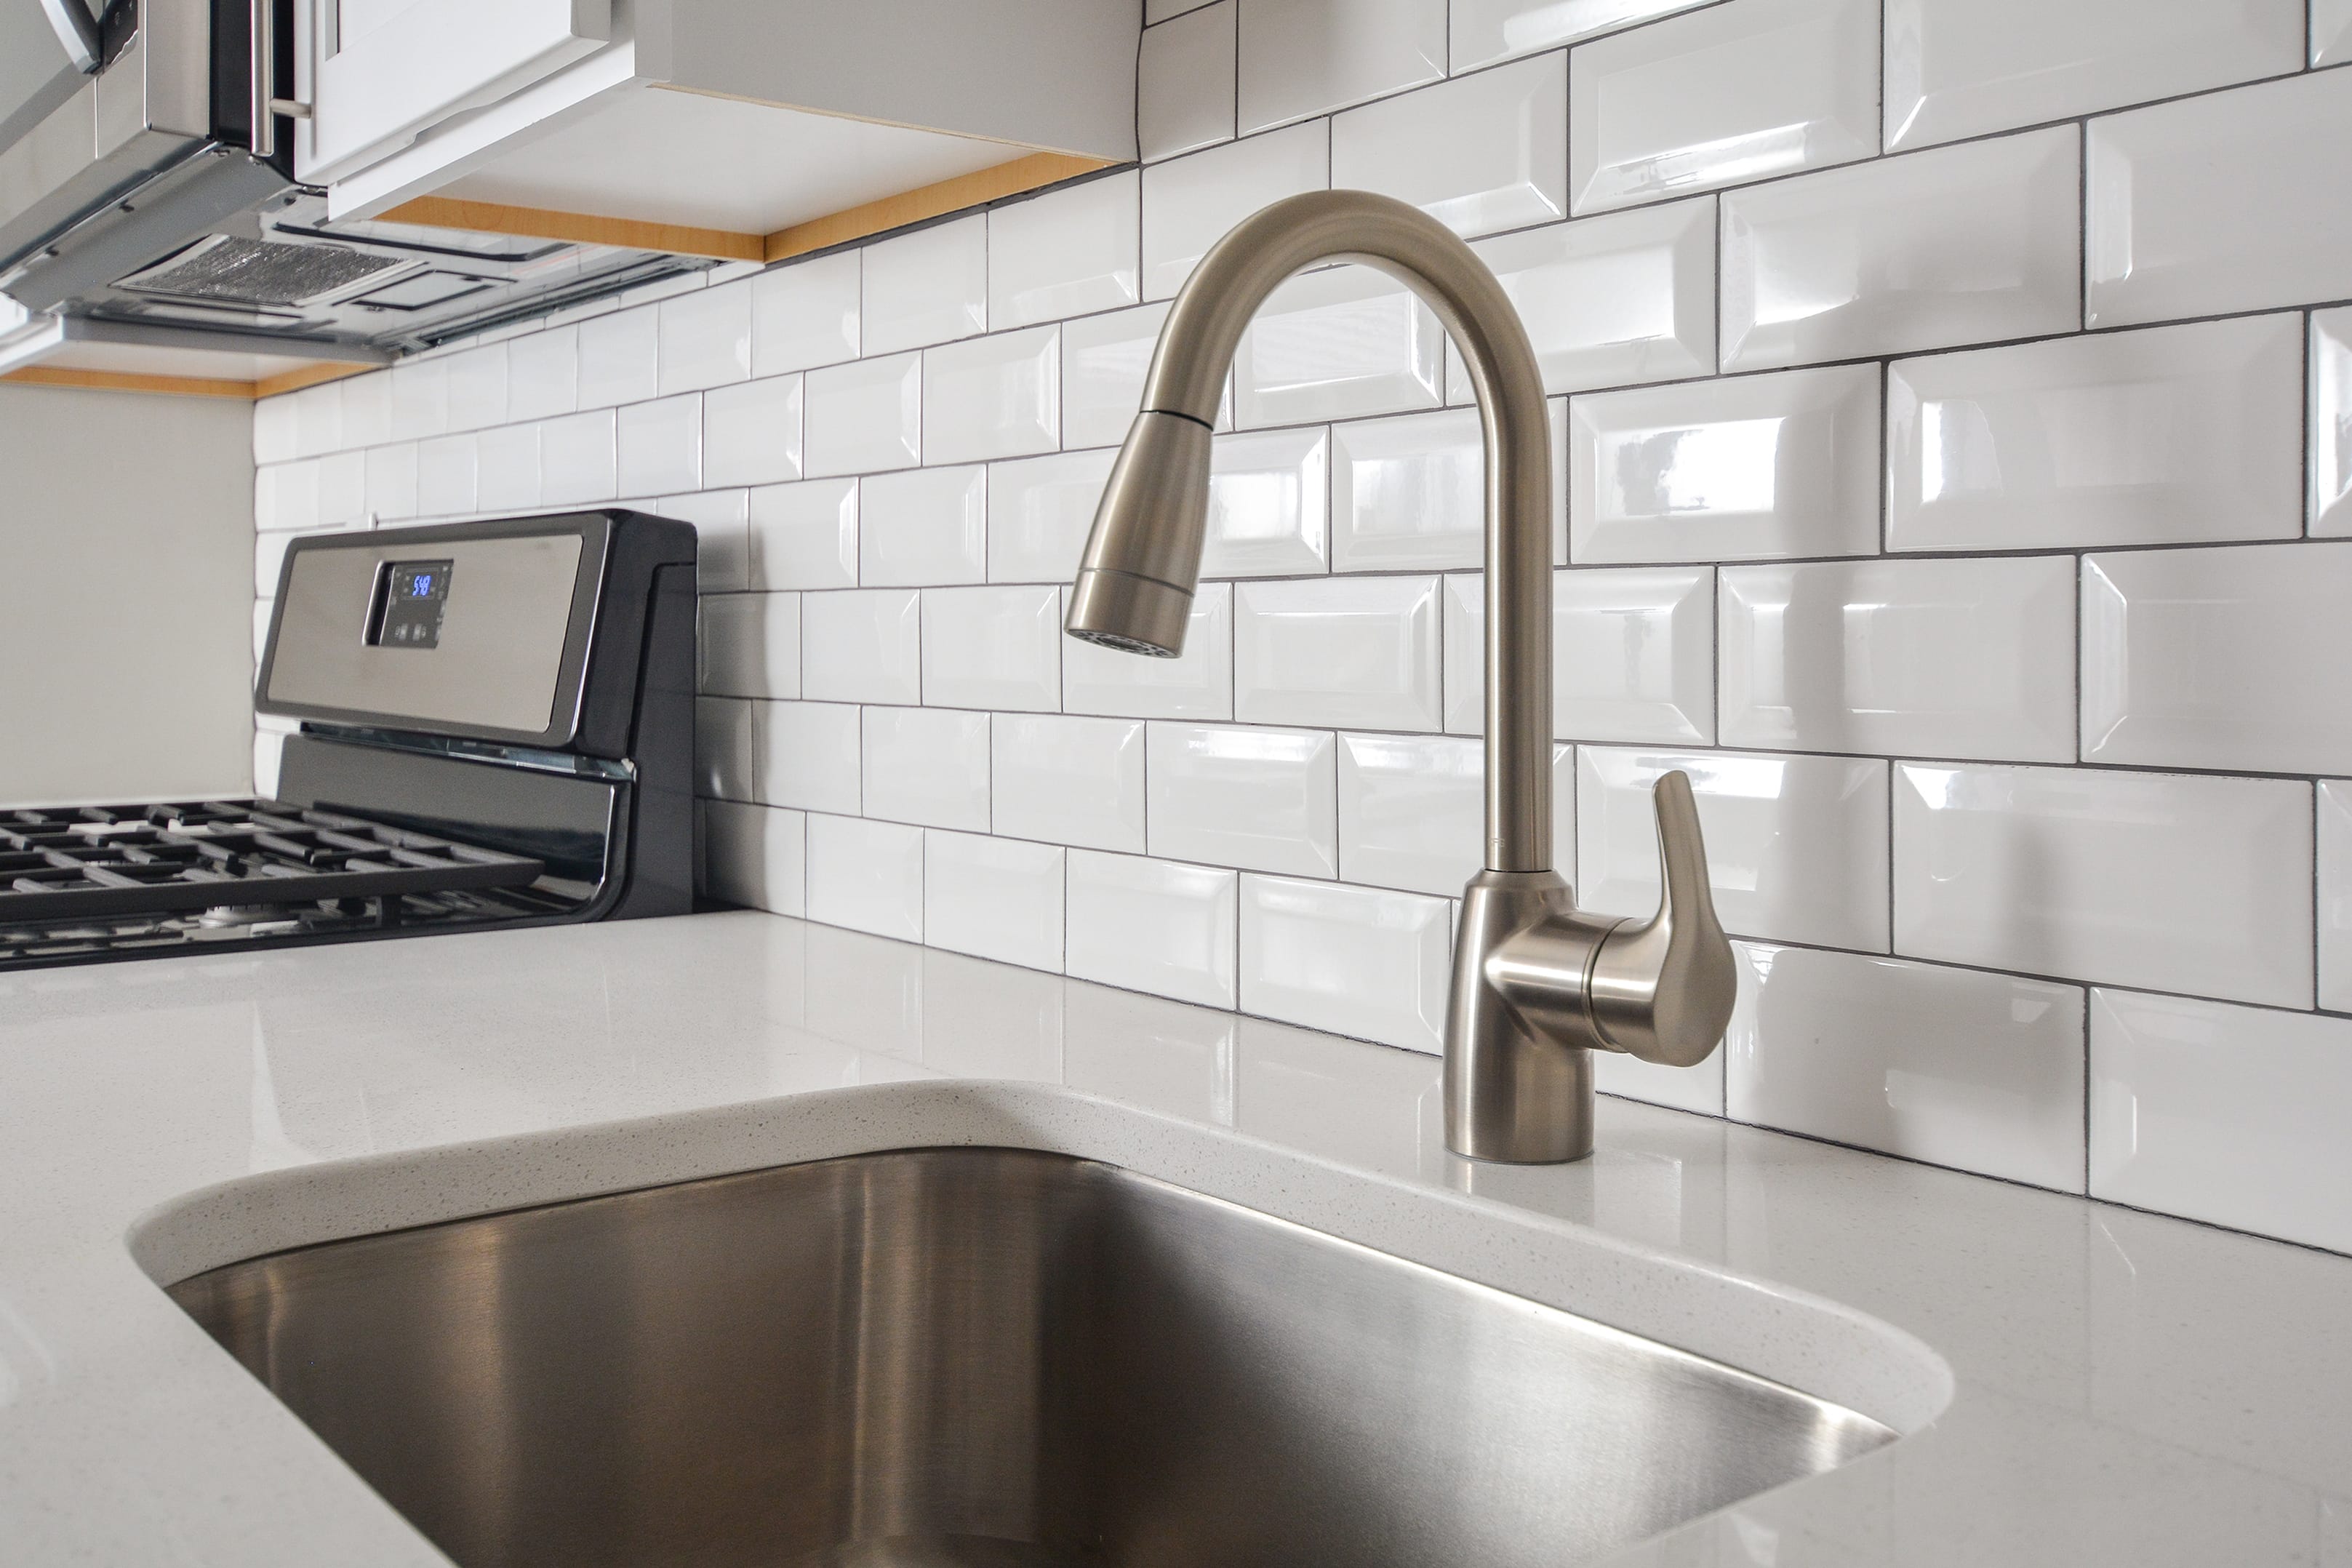 Tile backsplash and stainless-steel appliances at Parc at Summit in Summit, New Jersey